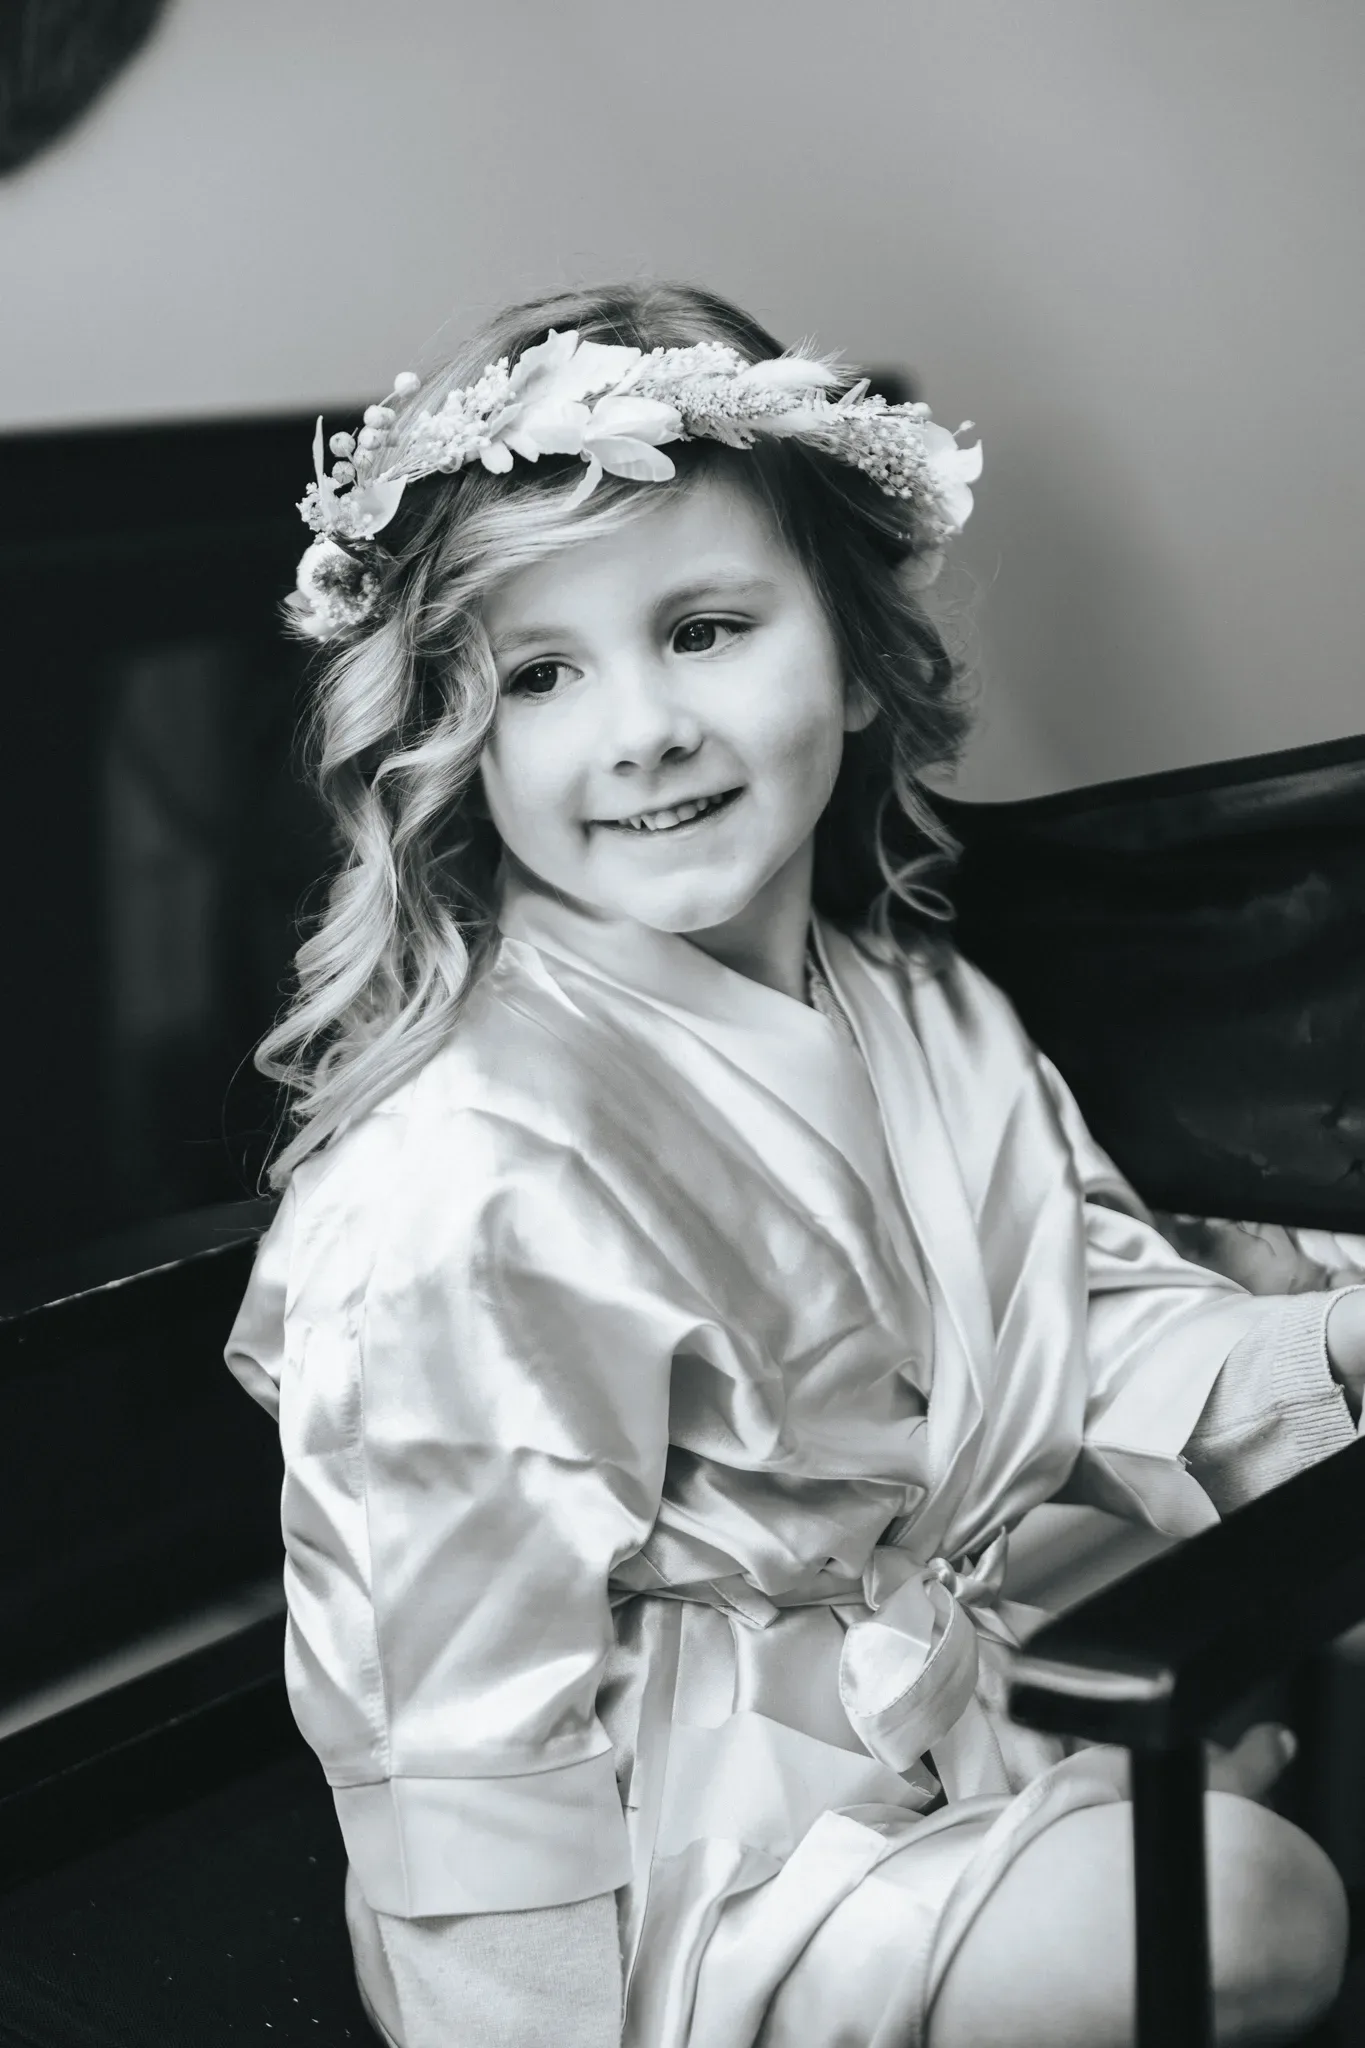 A black and white portrait of a young girl with curly hair, wearing a silk robe and a floral hat, sitting beside a piano and smiling gently at the camera.